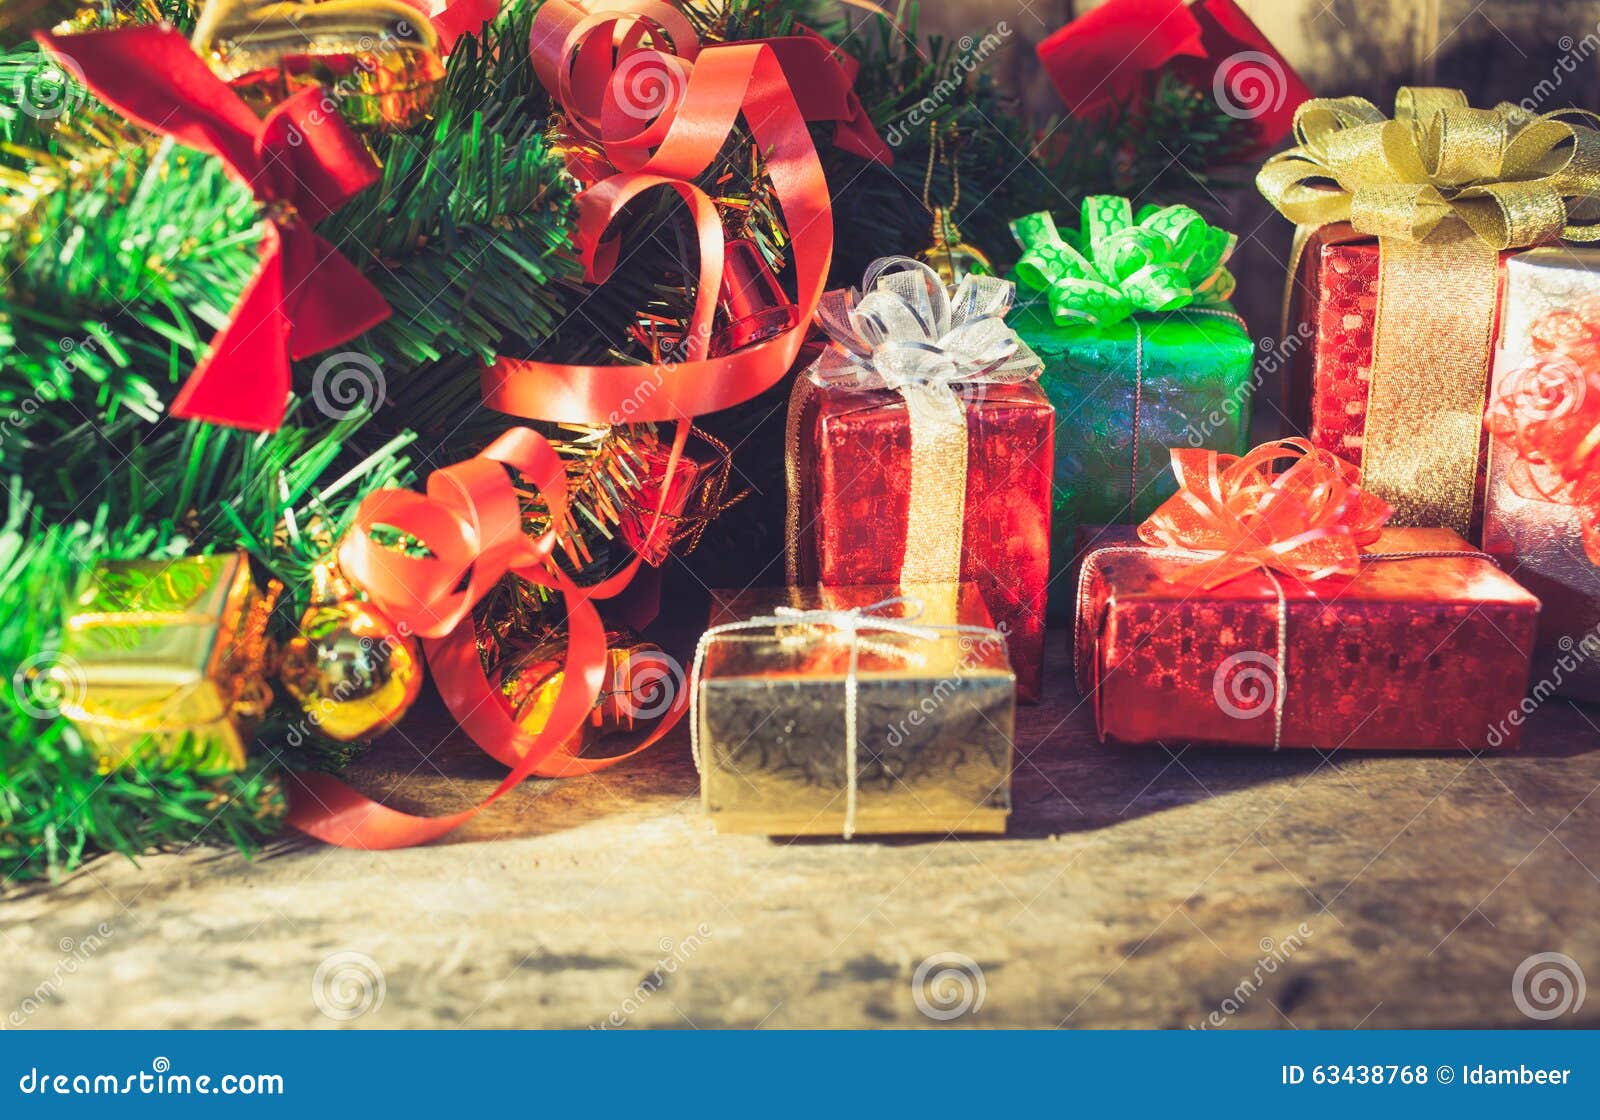 Gifts and christmas tree stock photo. Image of ornament - 63438768